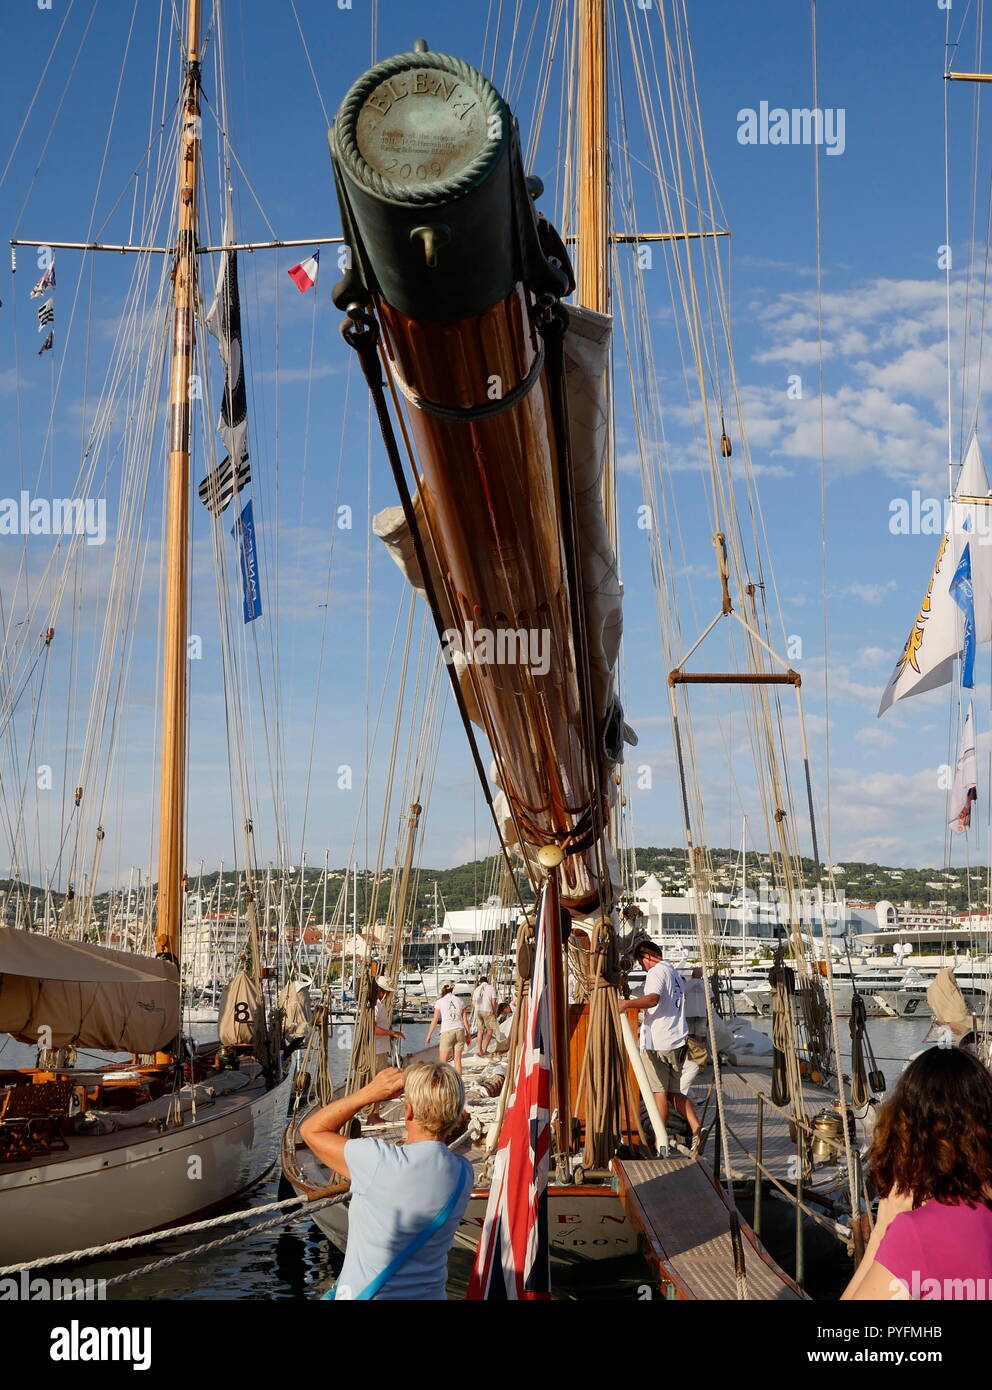 AJAXNETPHOTO. 2018. CANNES, FRANCE. - COTE D'AZUR RESORT - REGATES ROYALES CANNES 2018 -COMPETITORS MOORED IN THE OLD PORT AT THE END OF A DAY'S RACING. YACHT: ELENA. PHOTO:JONATHAN EASTLAND/AJAX REF:GX8 182509 595 Stock Photo